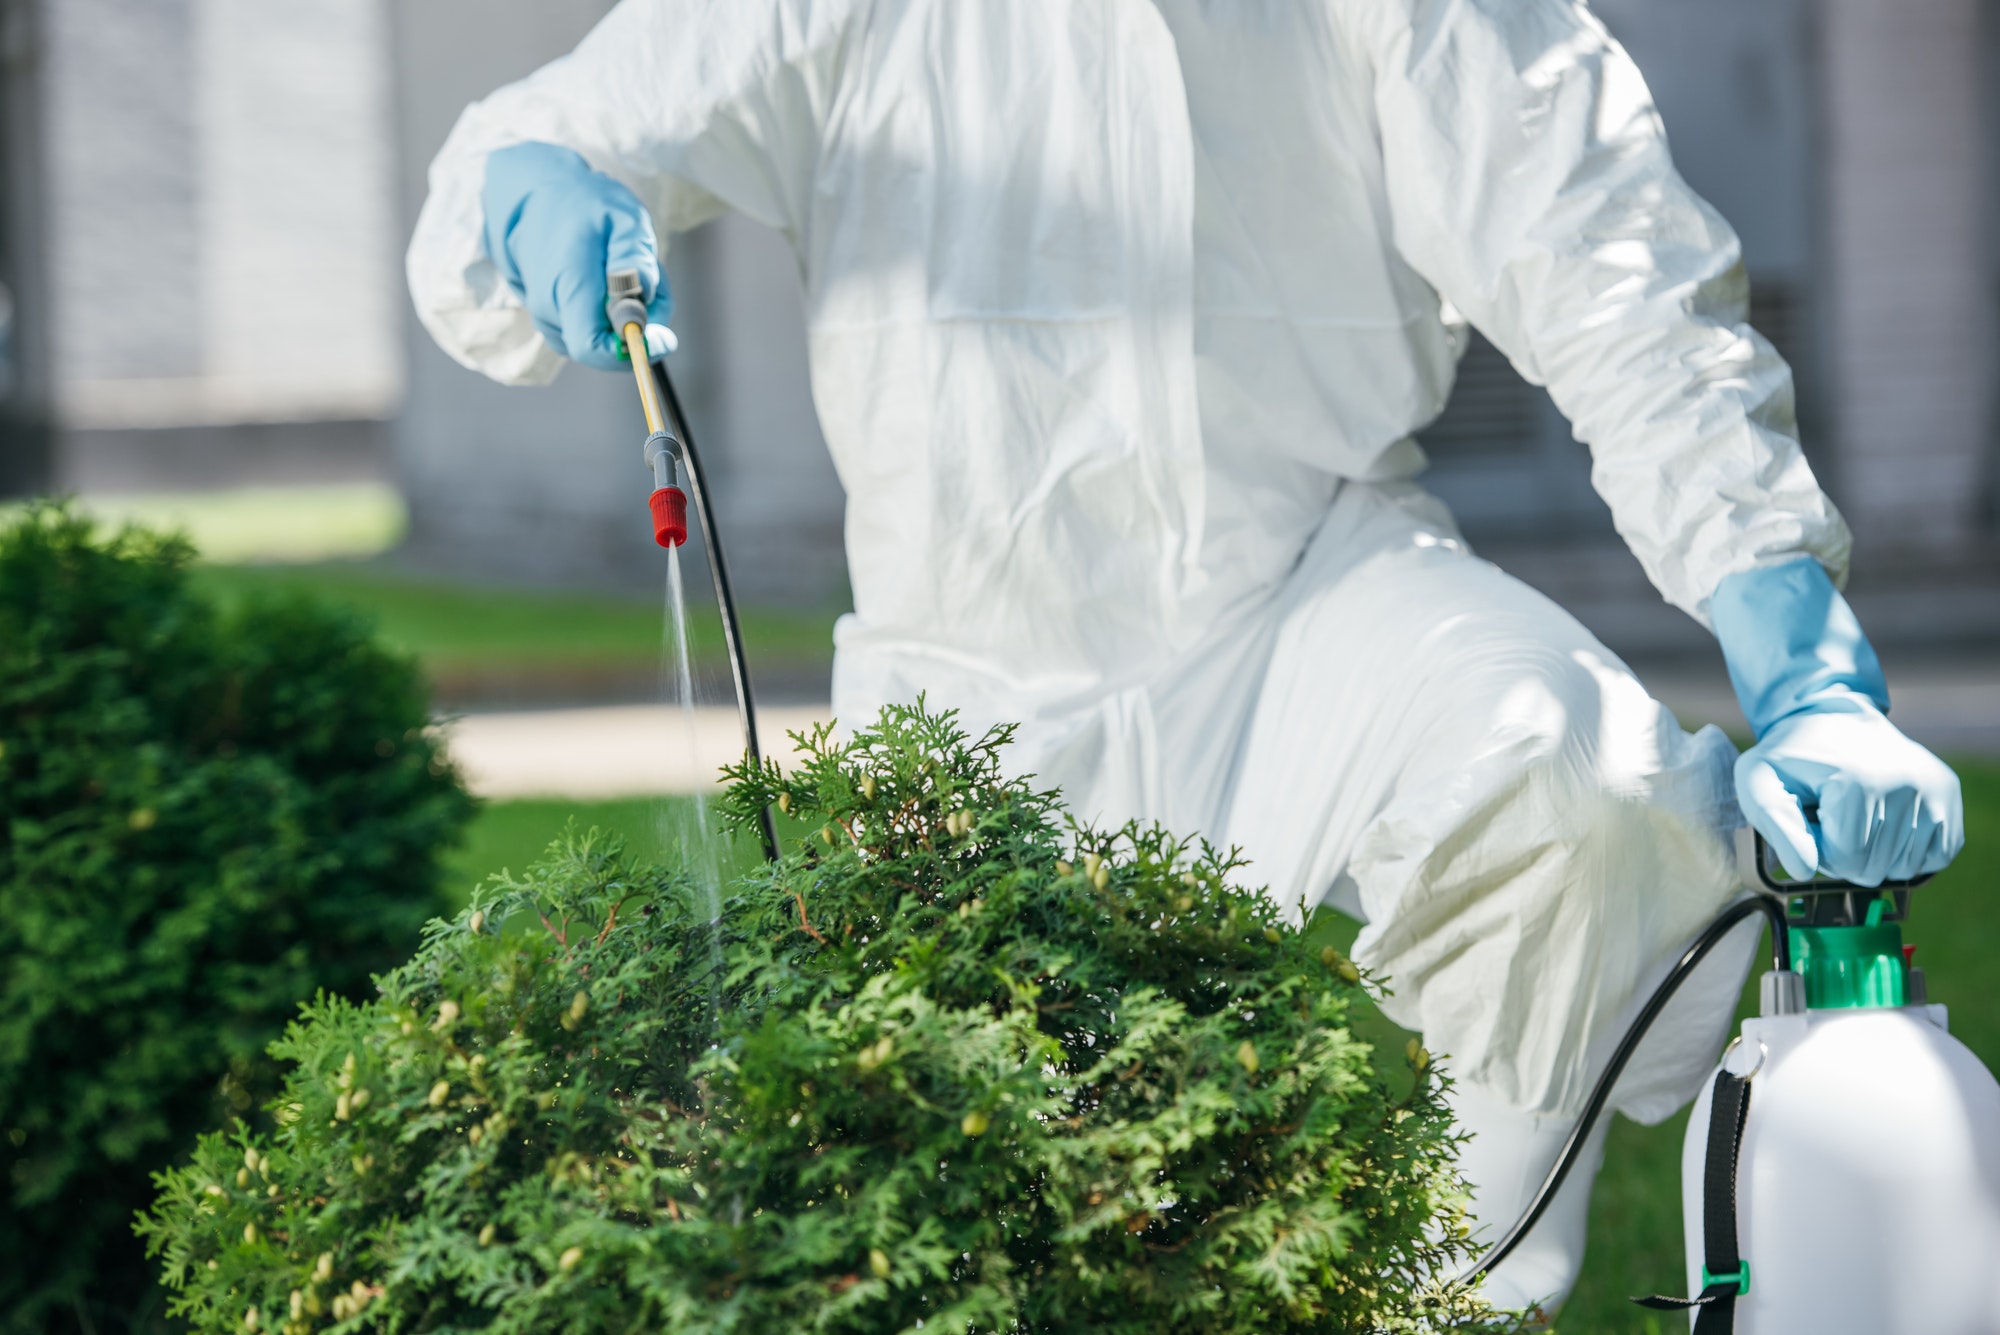 cropped image of pest control worker in uniform spraying chemicals on bush